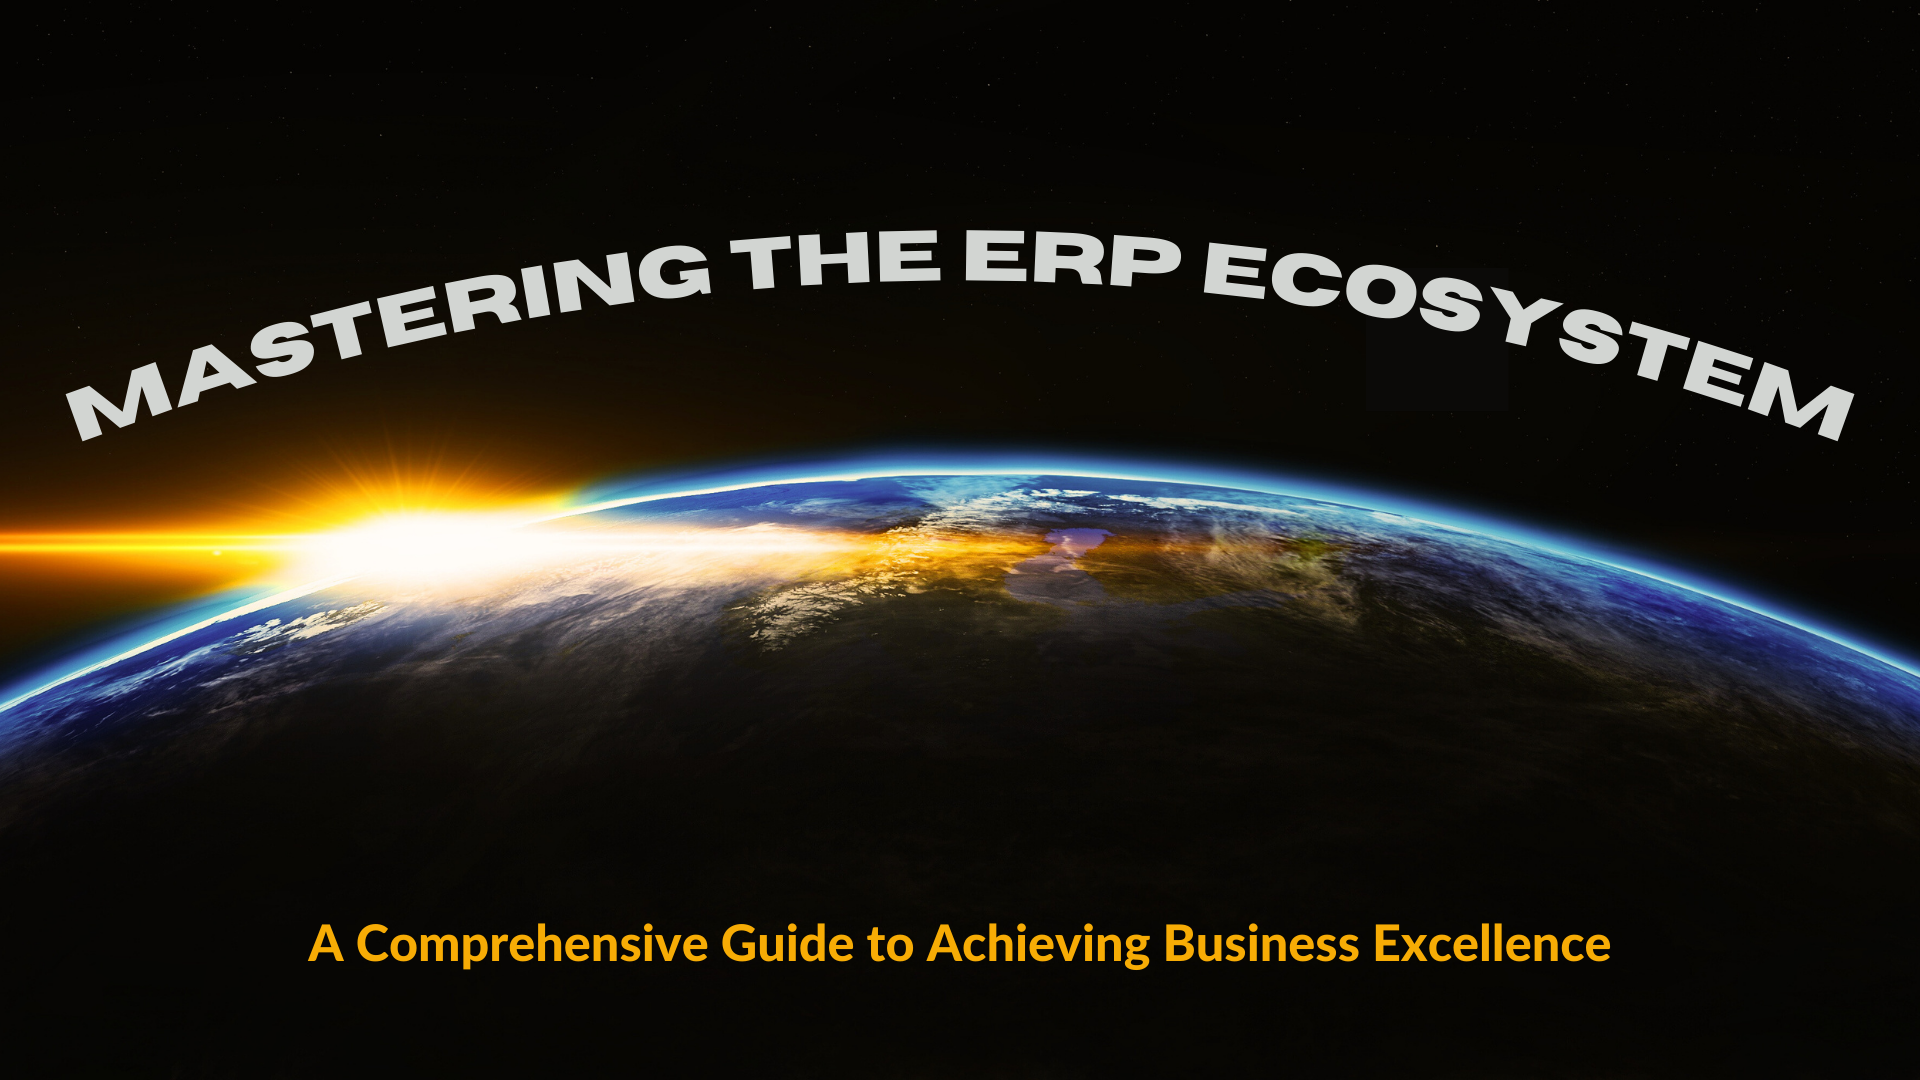 erp software - Mastering the ERP Ecosystem COVER